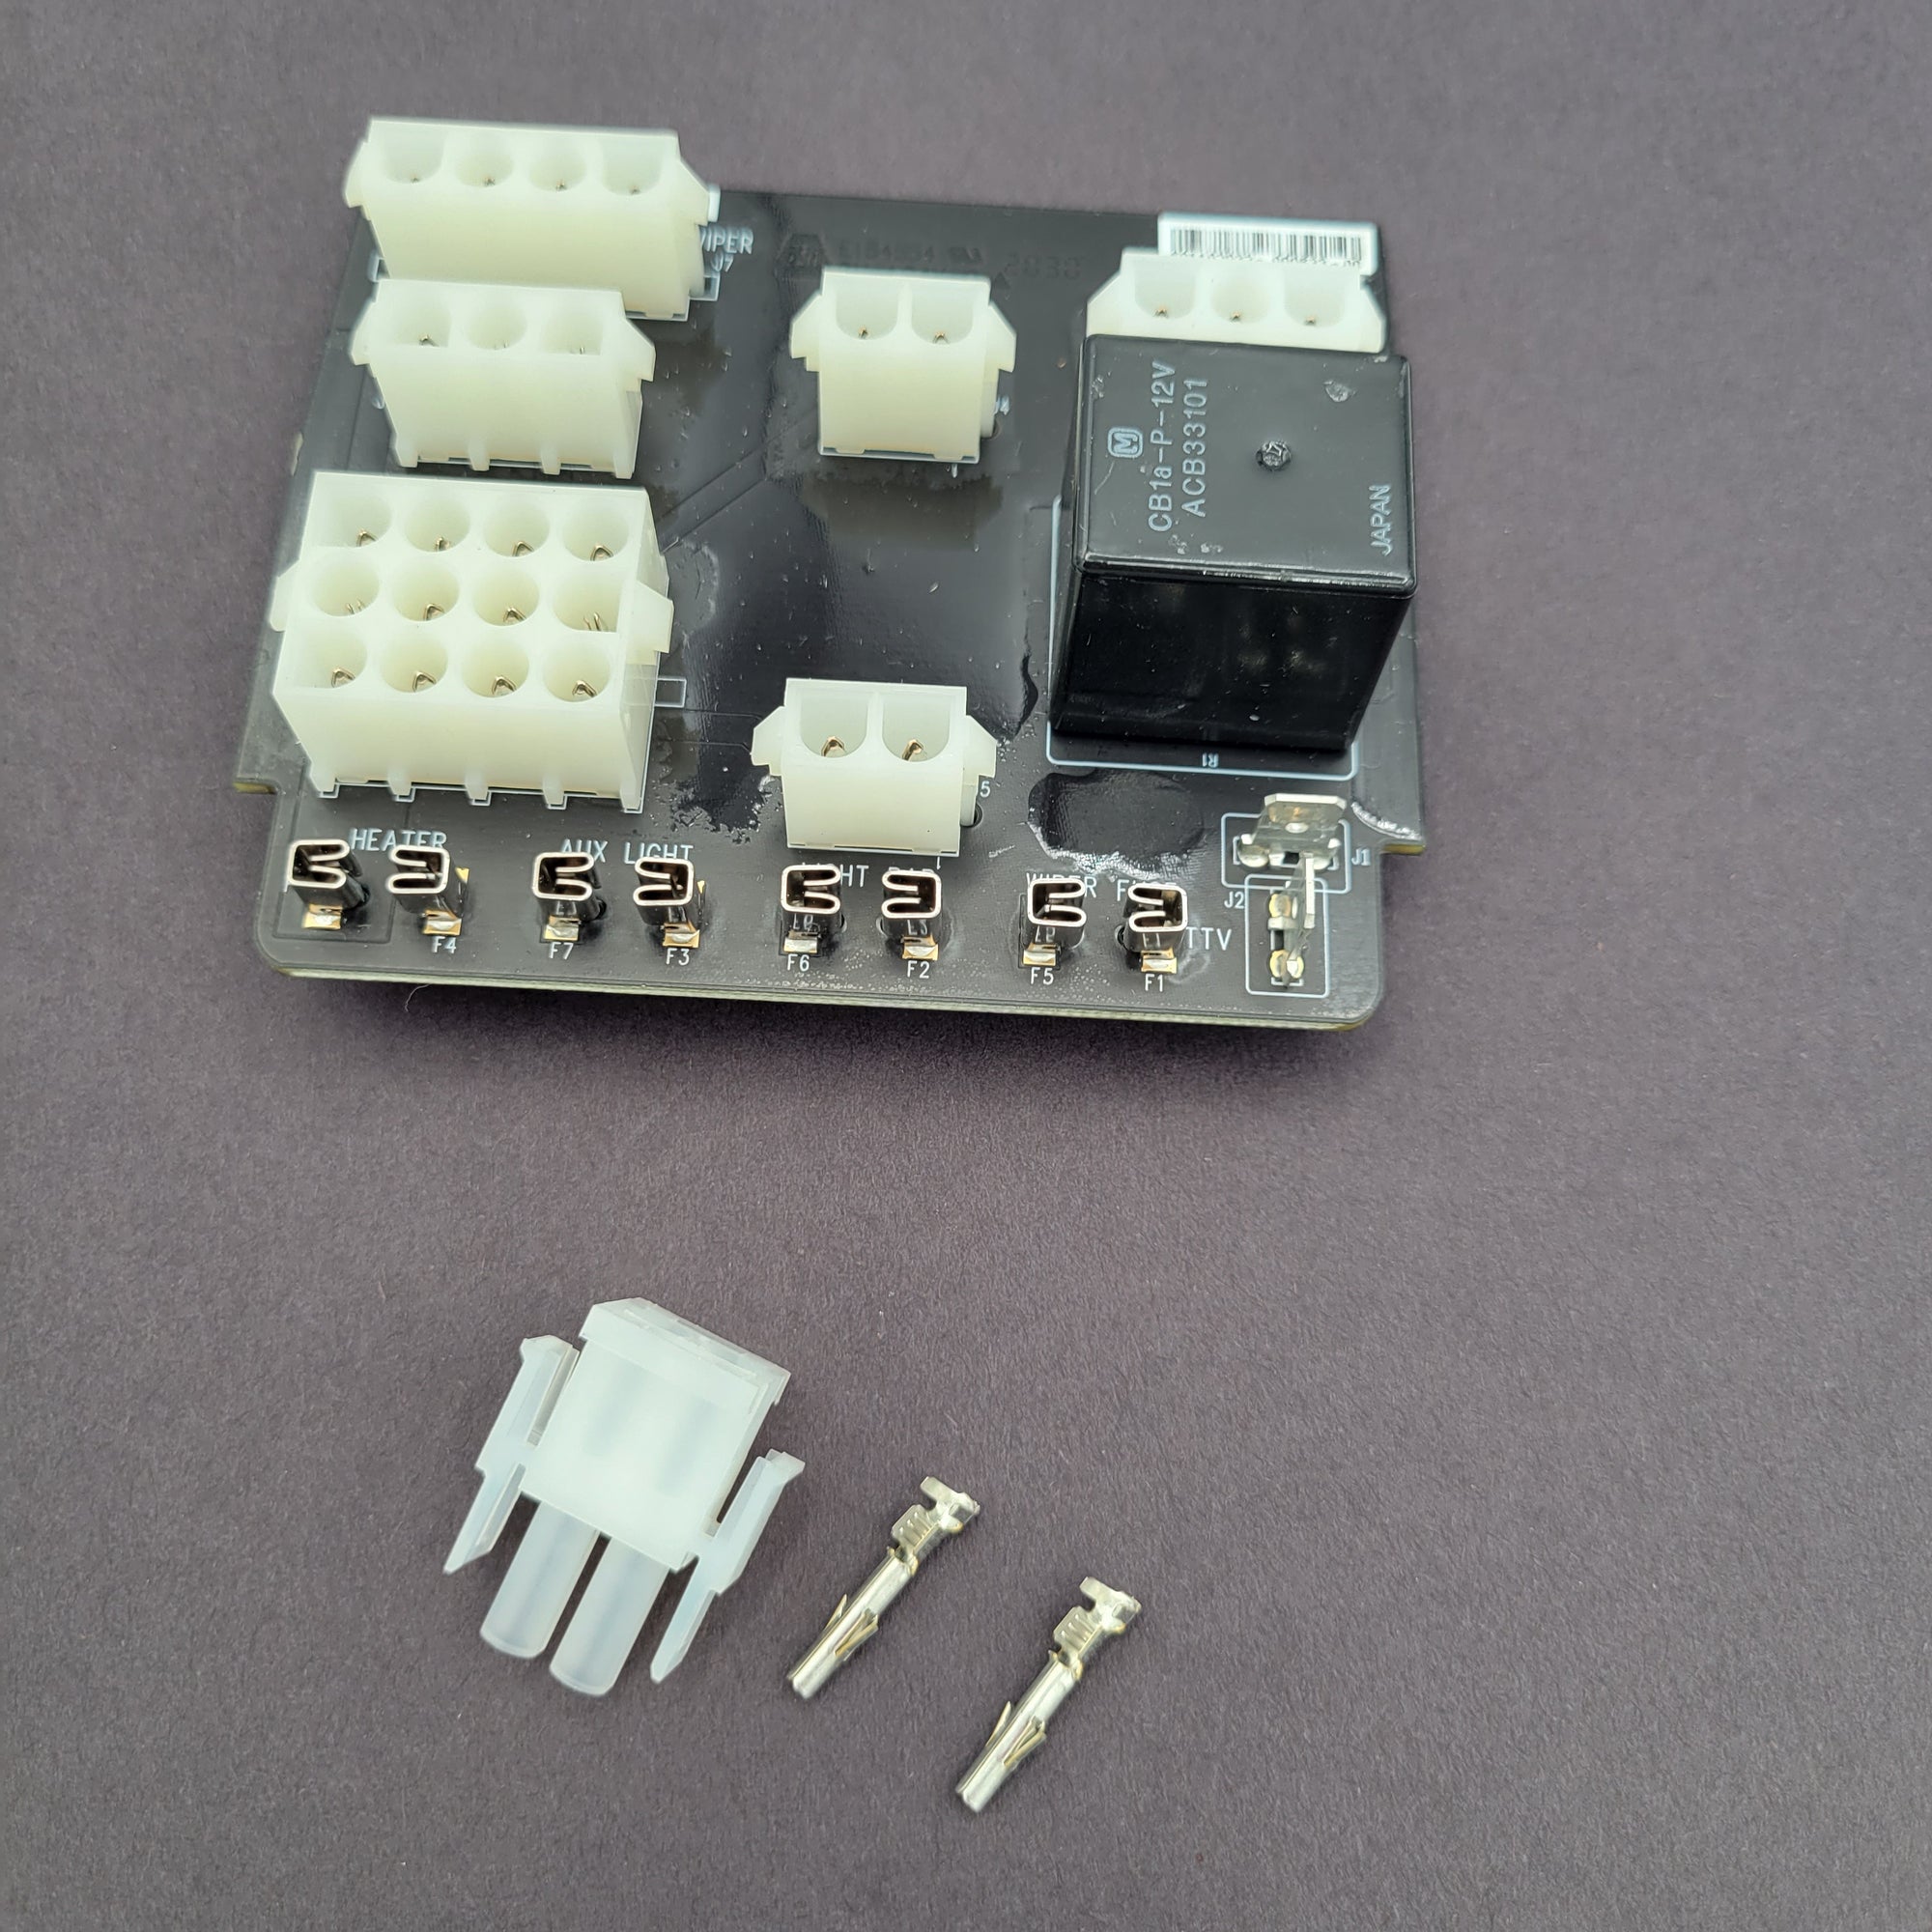 Molex 2 pin - for Pioneer 700/1000 switch panel.